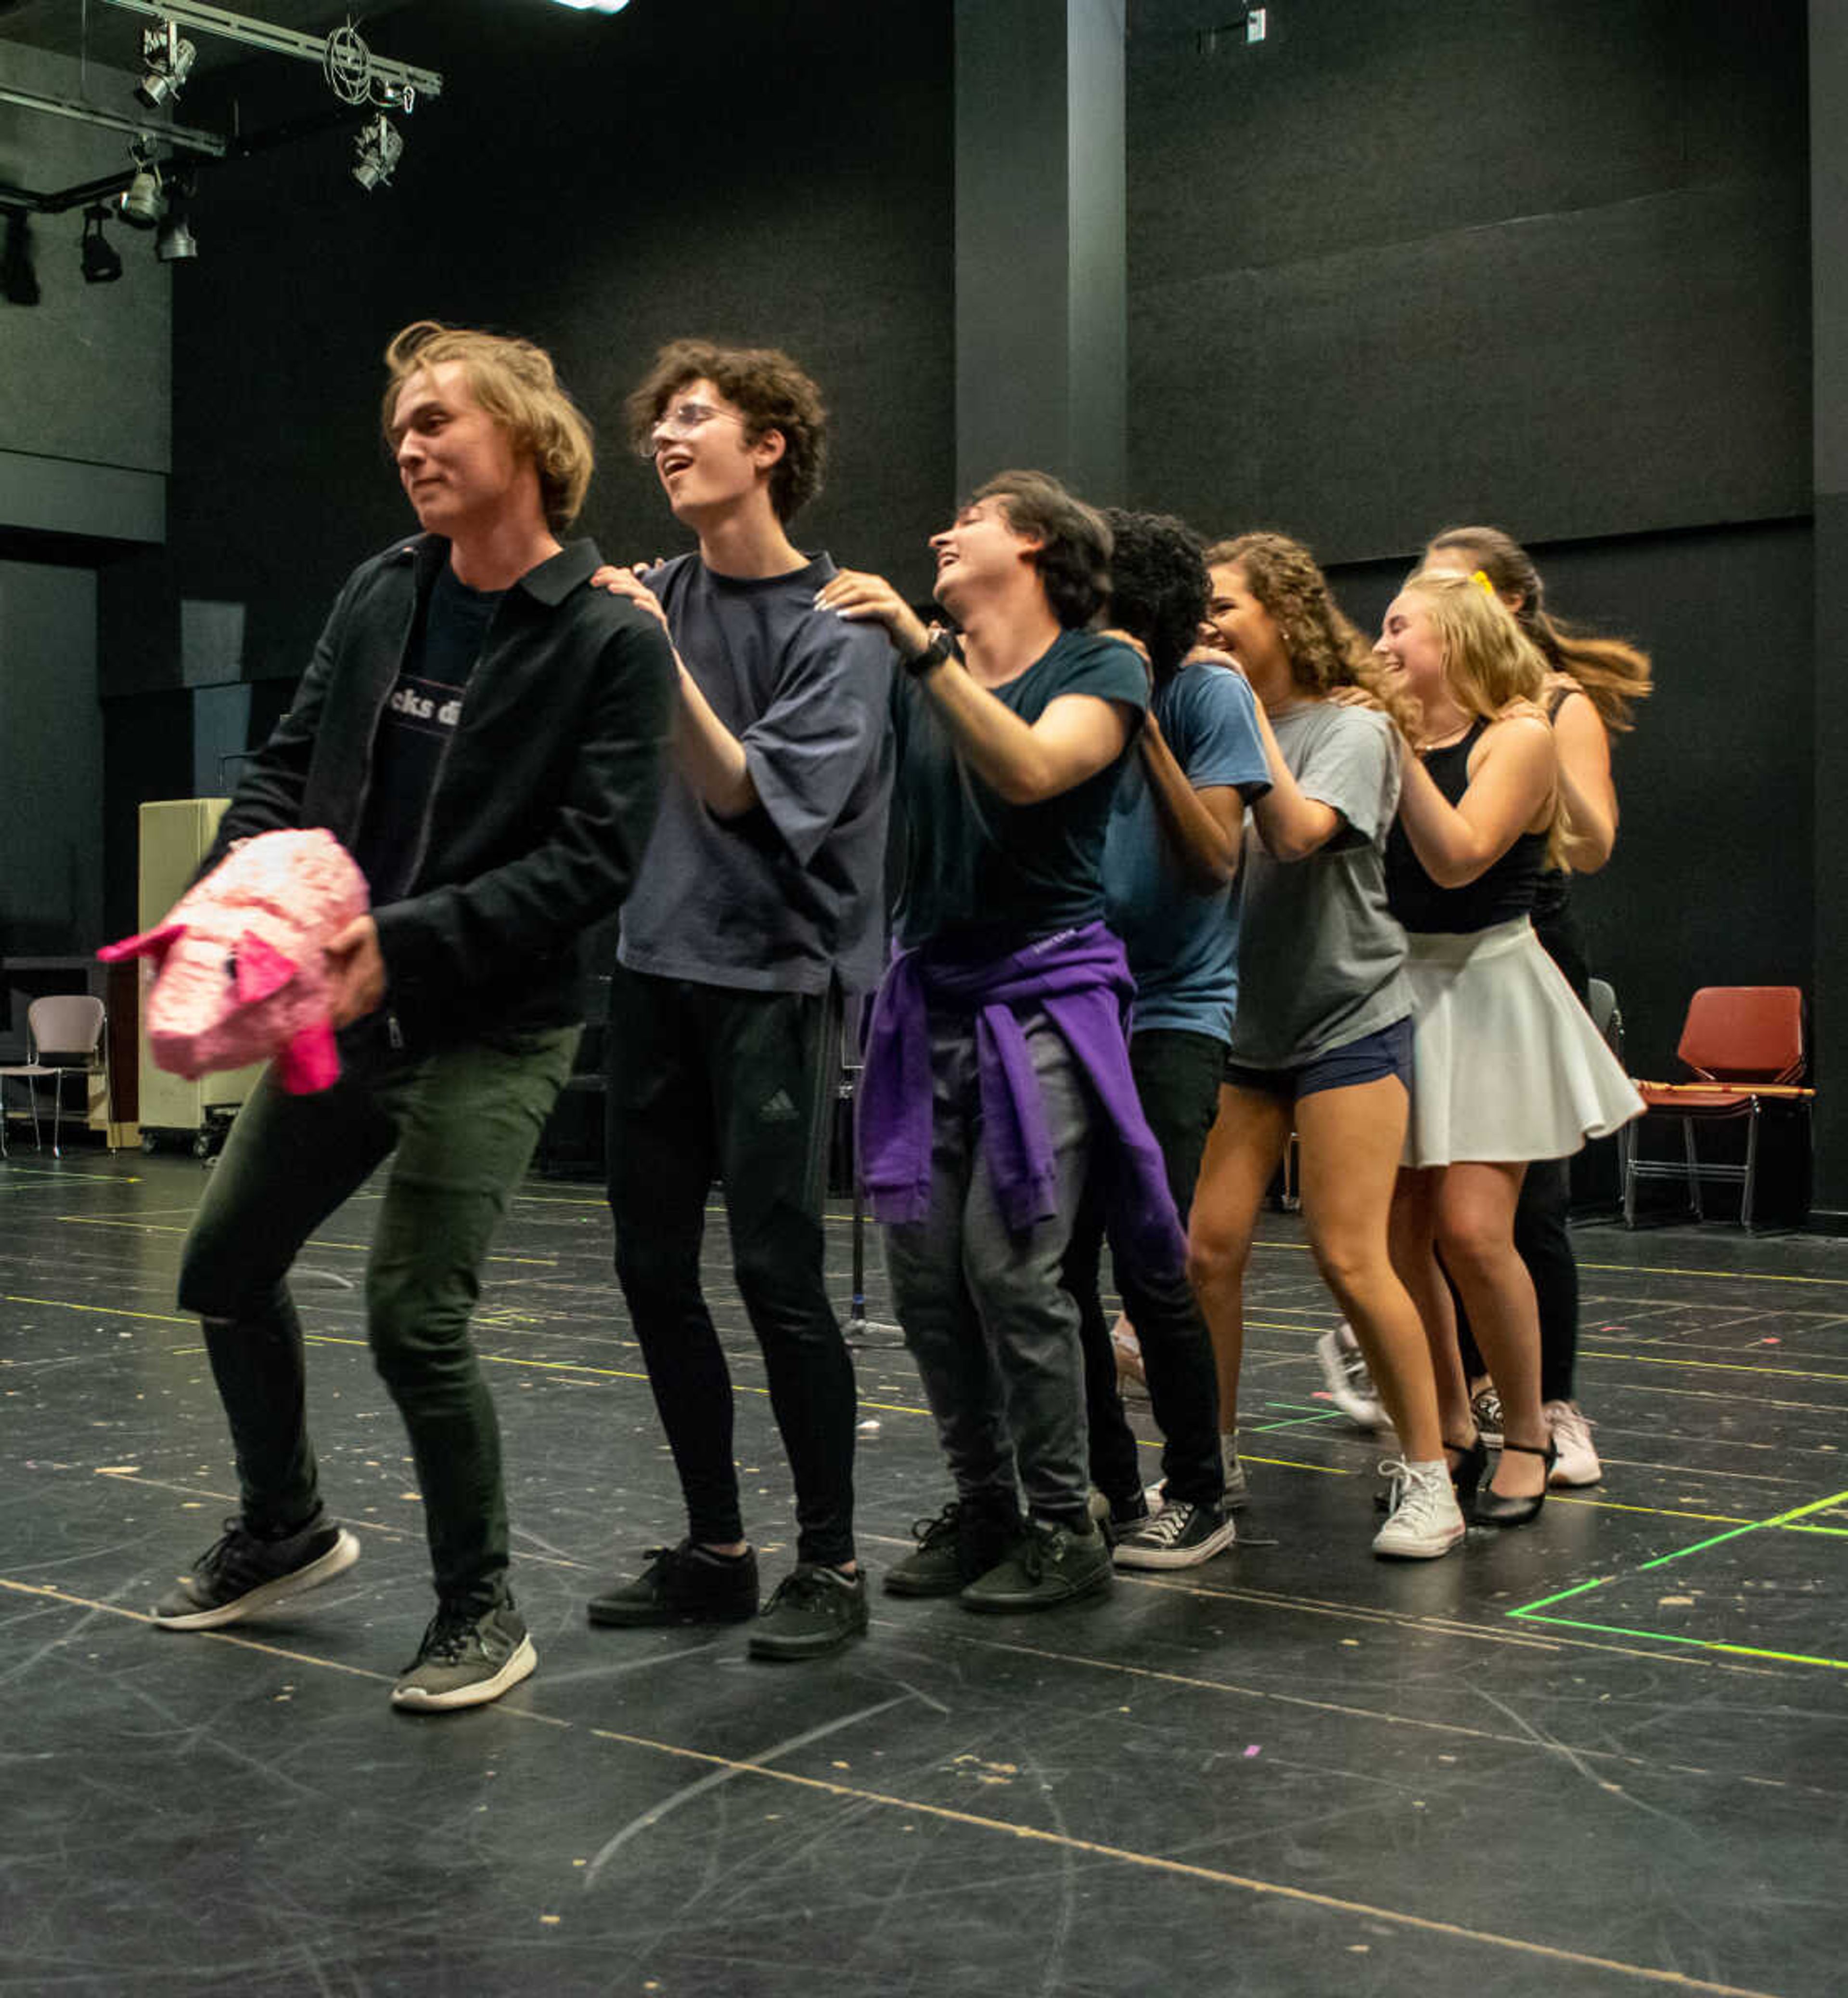 The cast of Heathers: The musical energetically performing the song "Big Fun". Tuesday, &#8206;October &#8206;15, &#8206;2019.